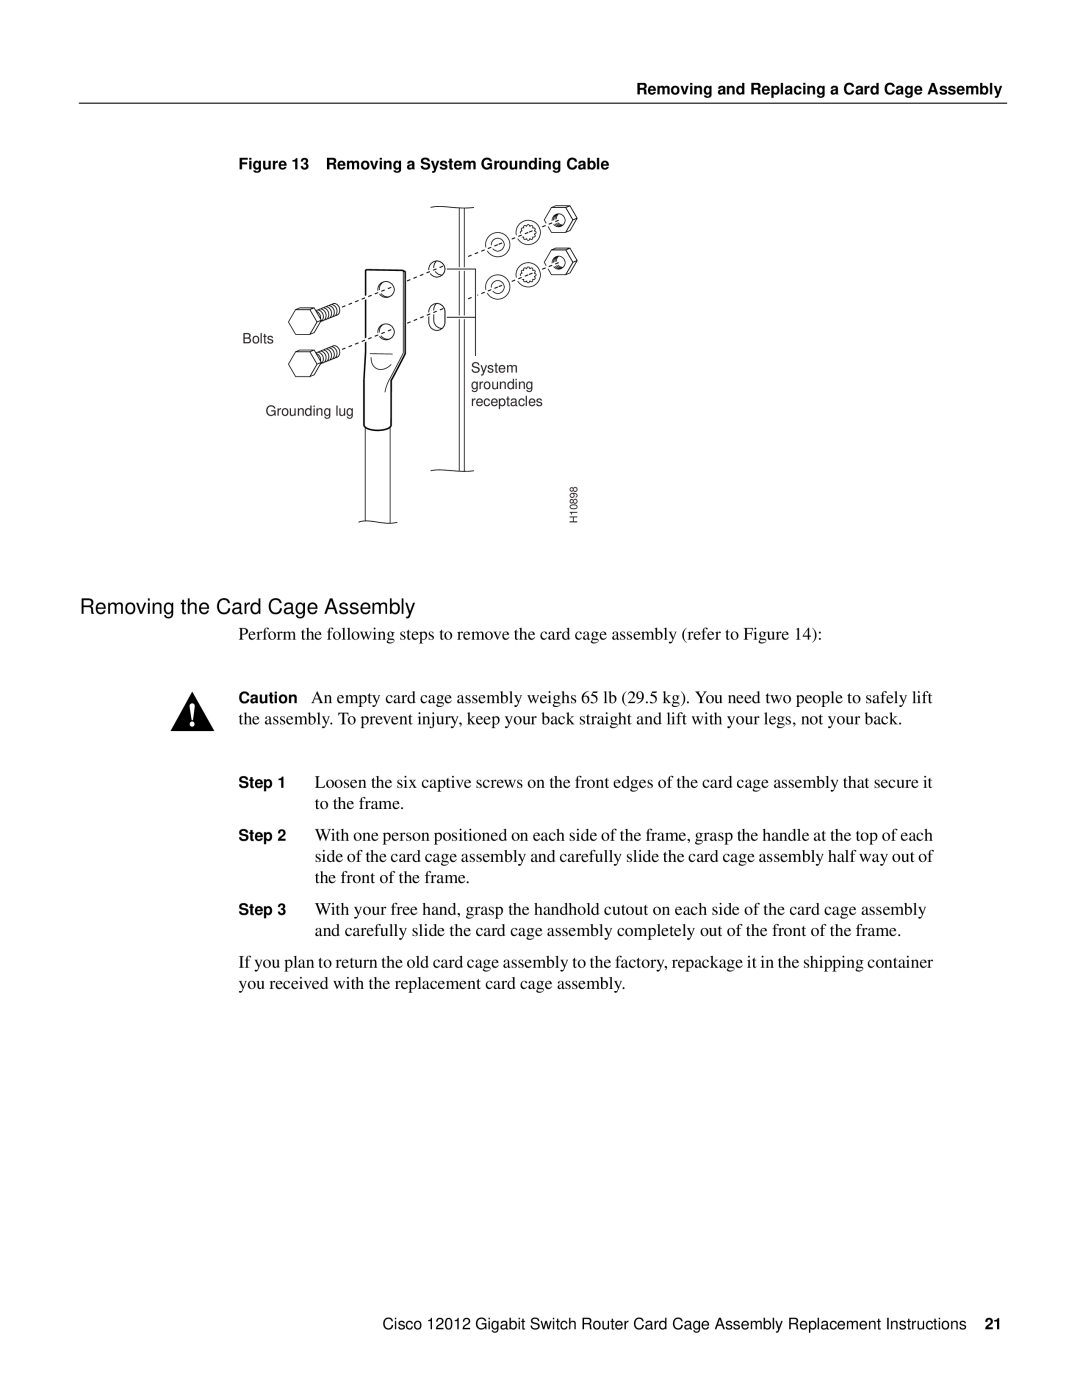 Cisco Systems 12012 manual Removing the Card Cage Assembly, H10898 